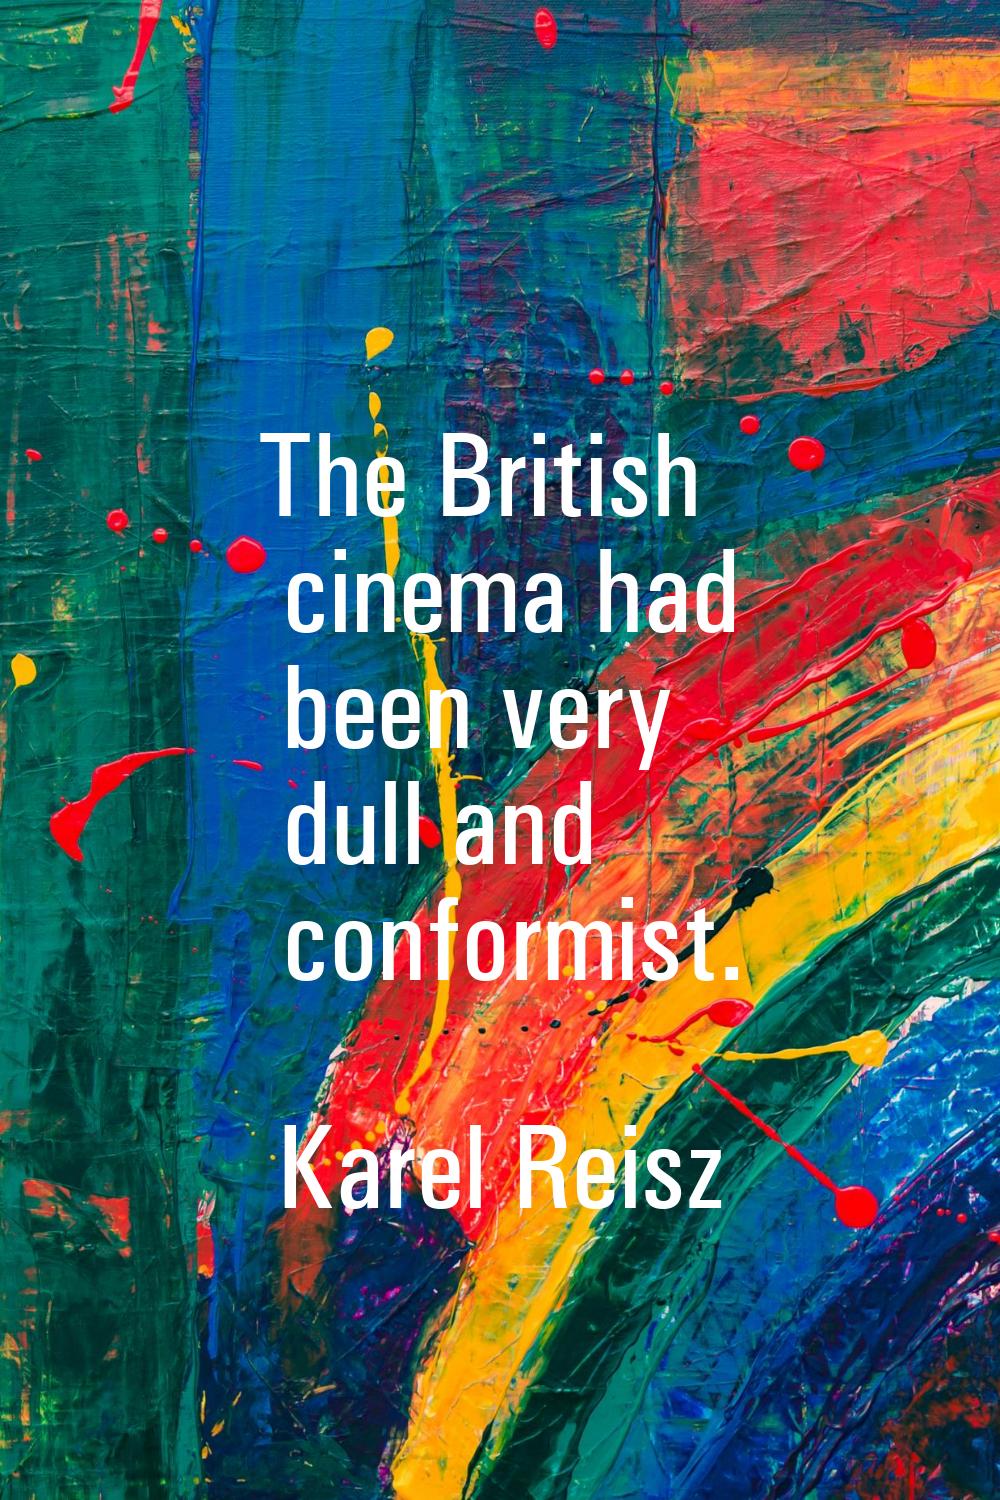 The British cinema had been very dull and conformist.